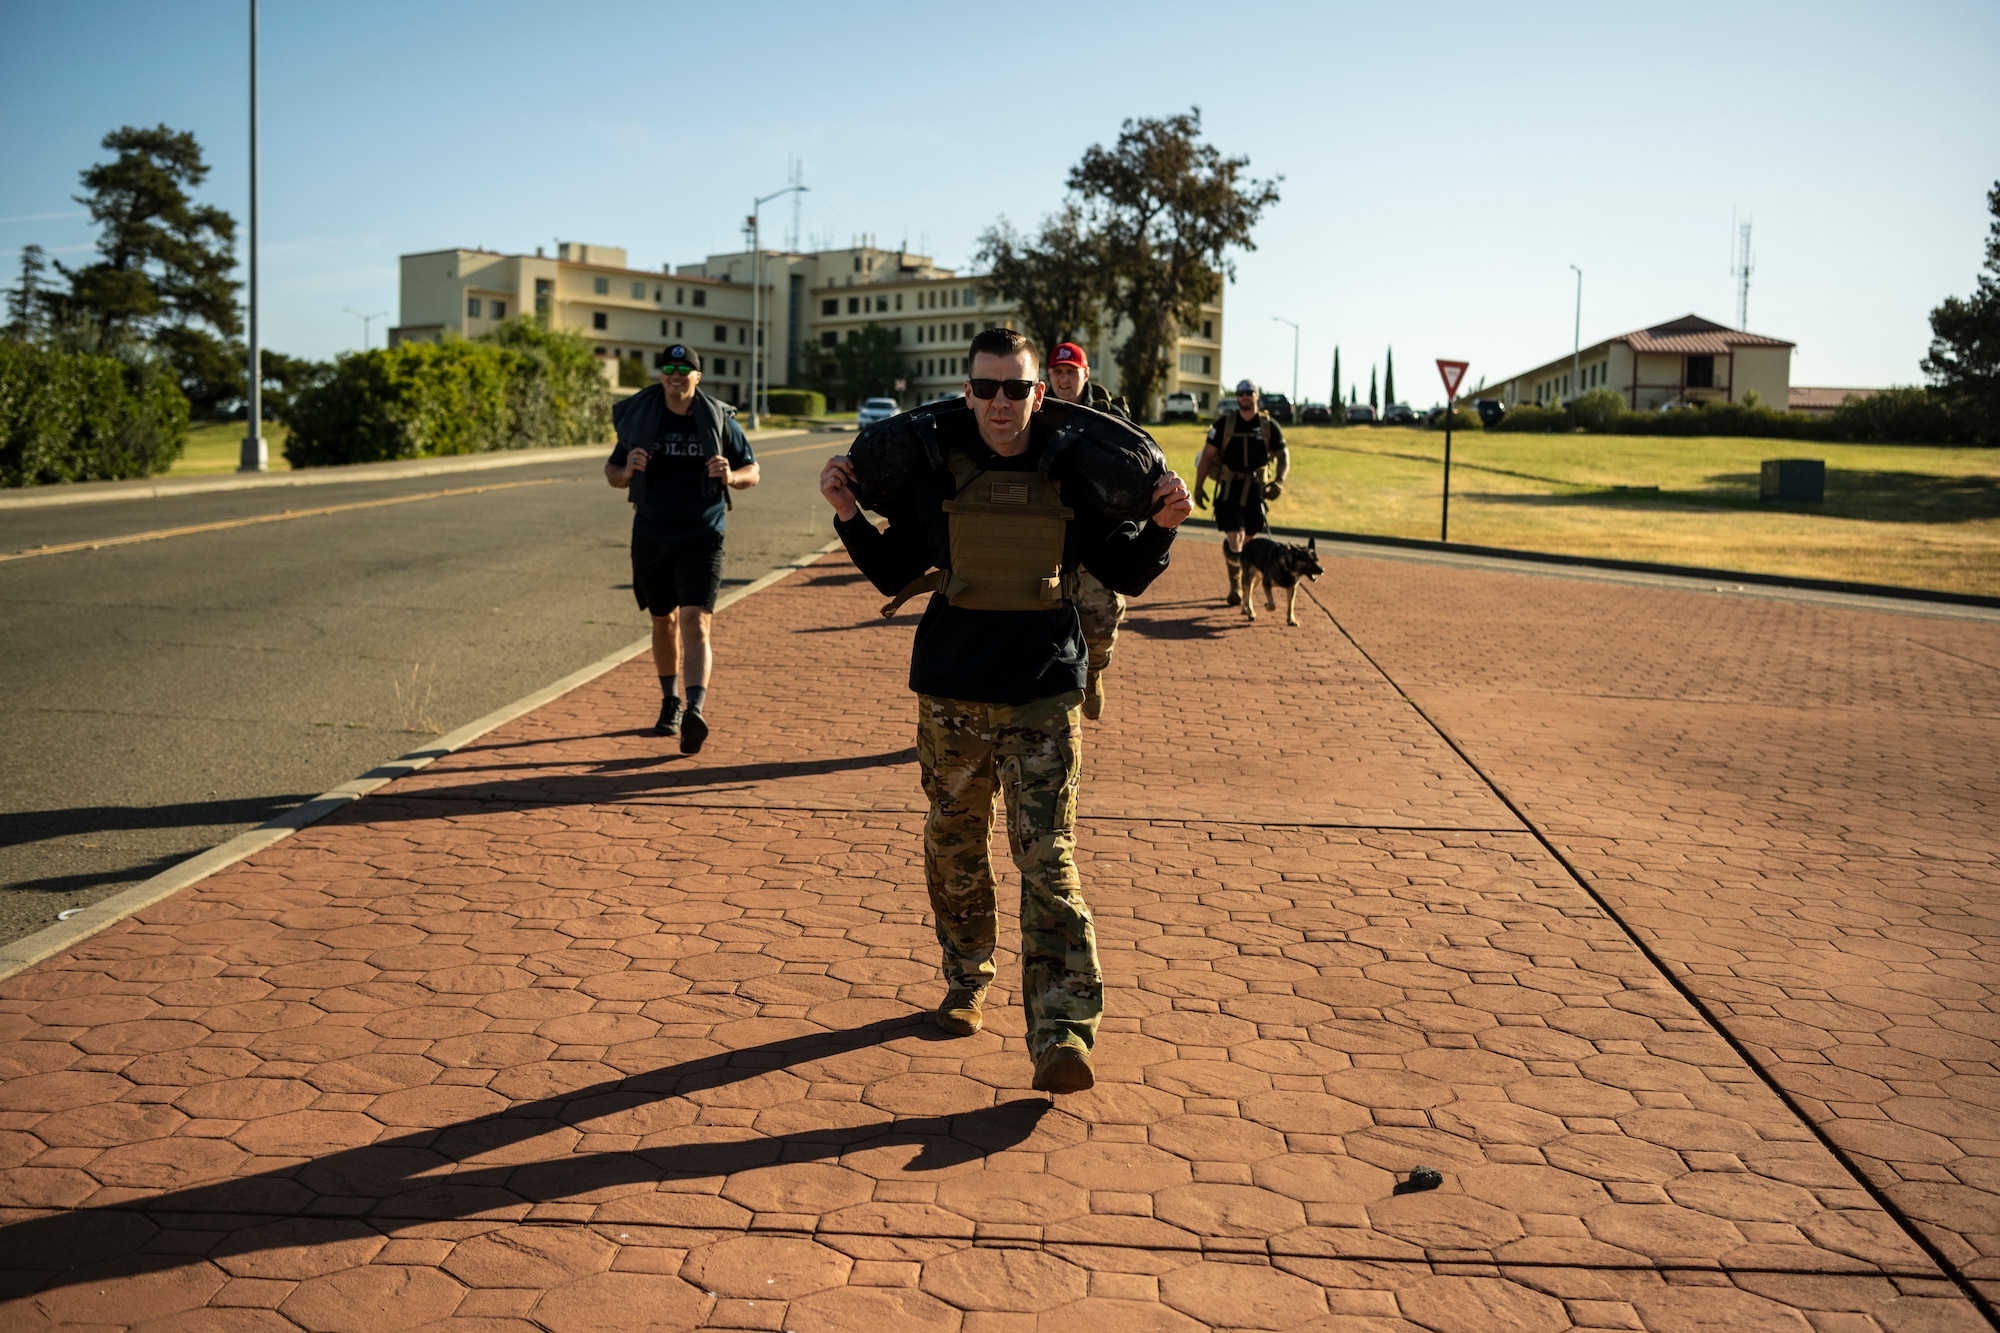 Service members walk along a sidewalk. In the center of the frame a man is seen walking with a large sandbag over his shoulders.